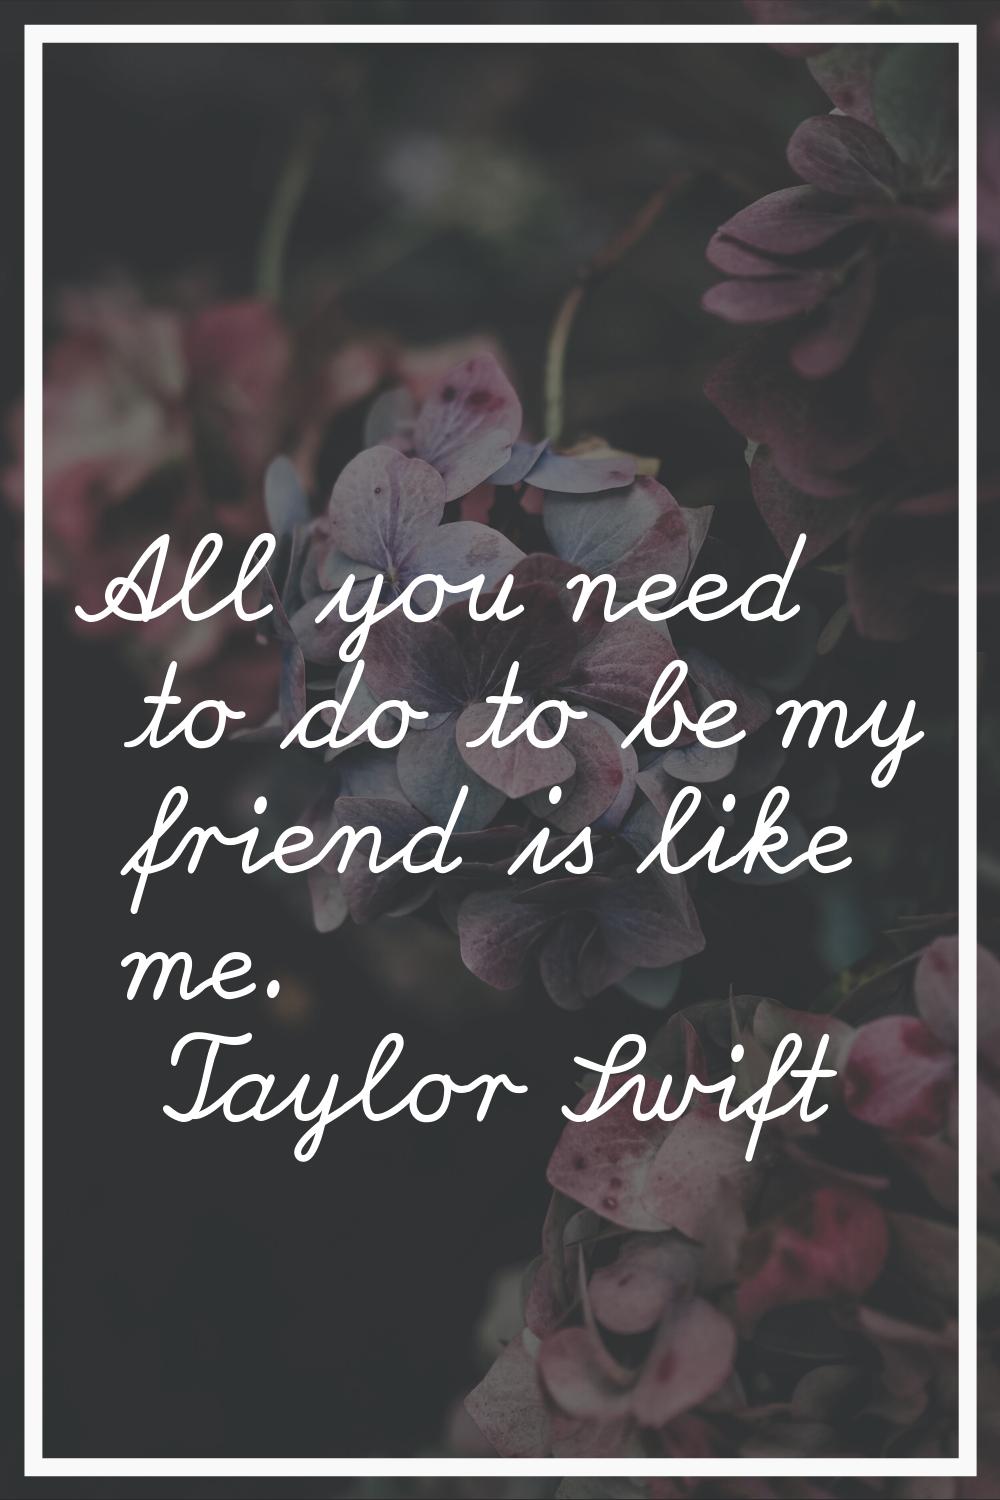 All you need to do to be my friend is like me.